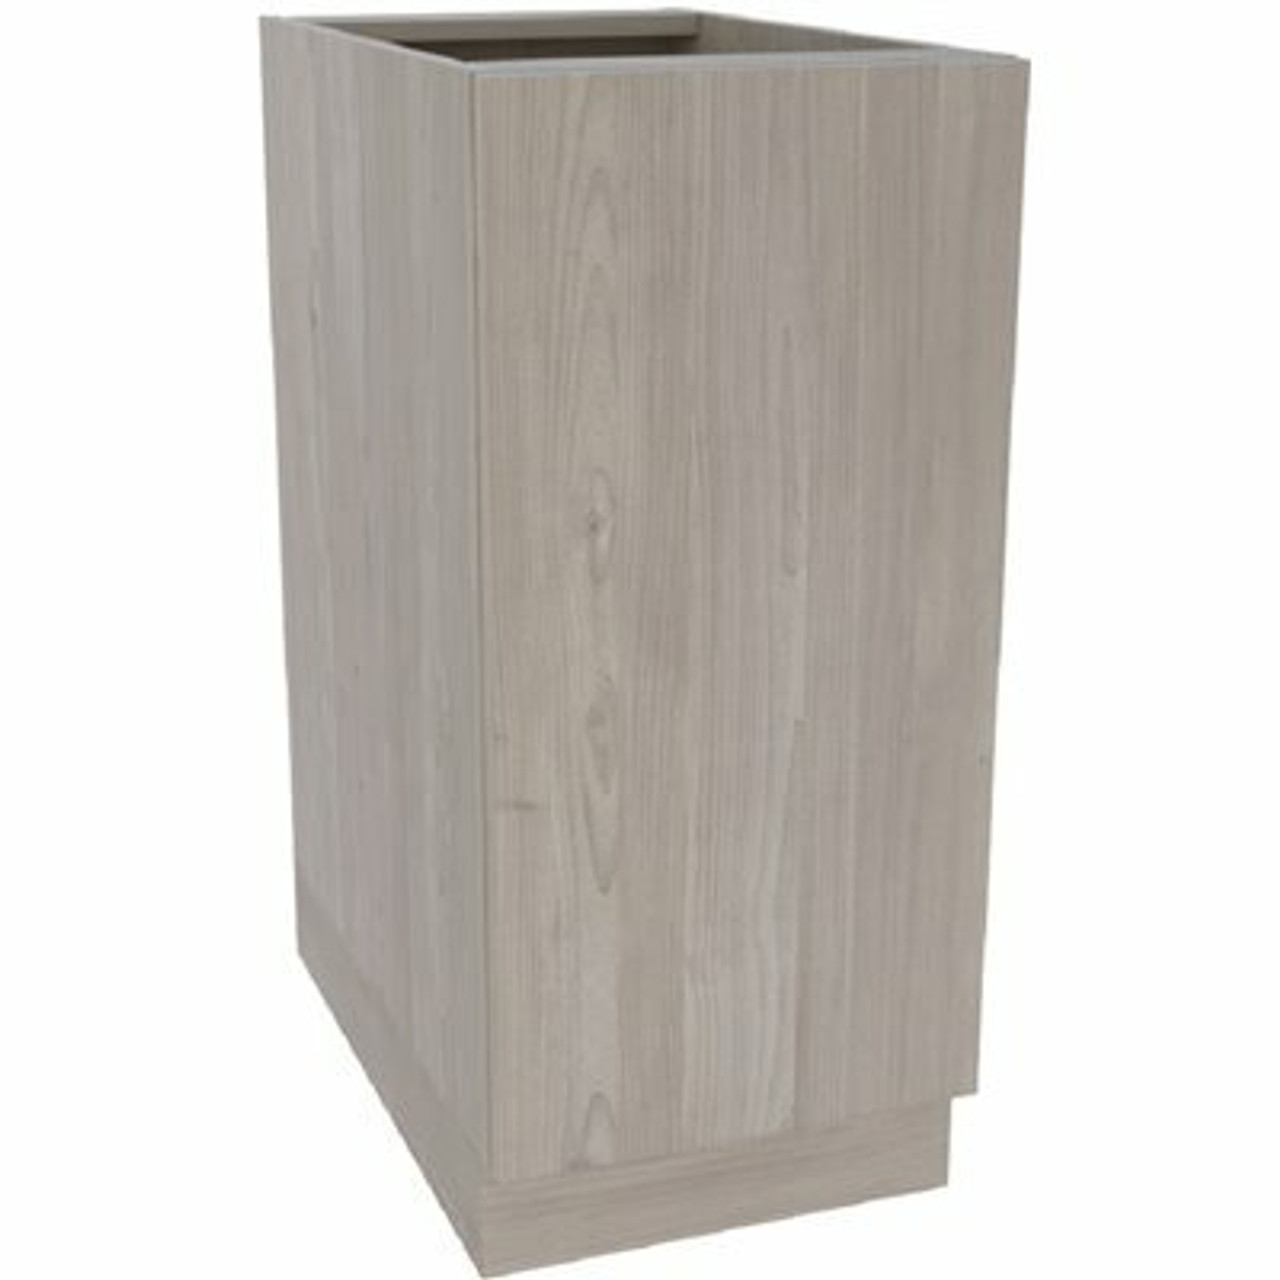 Cambridge Ready To Assemble Threespine 24 In. X 34.5 In. X 24 In. Stock Base Cabinet In Grey Nordic